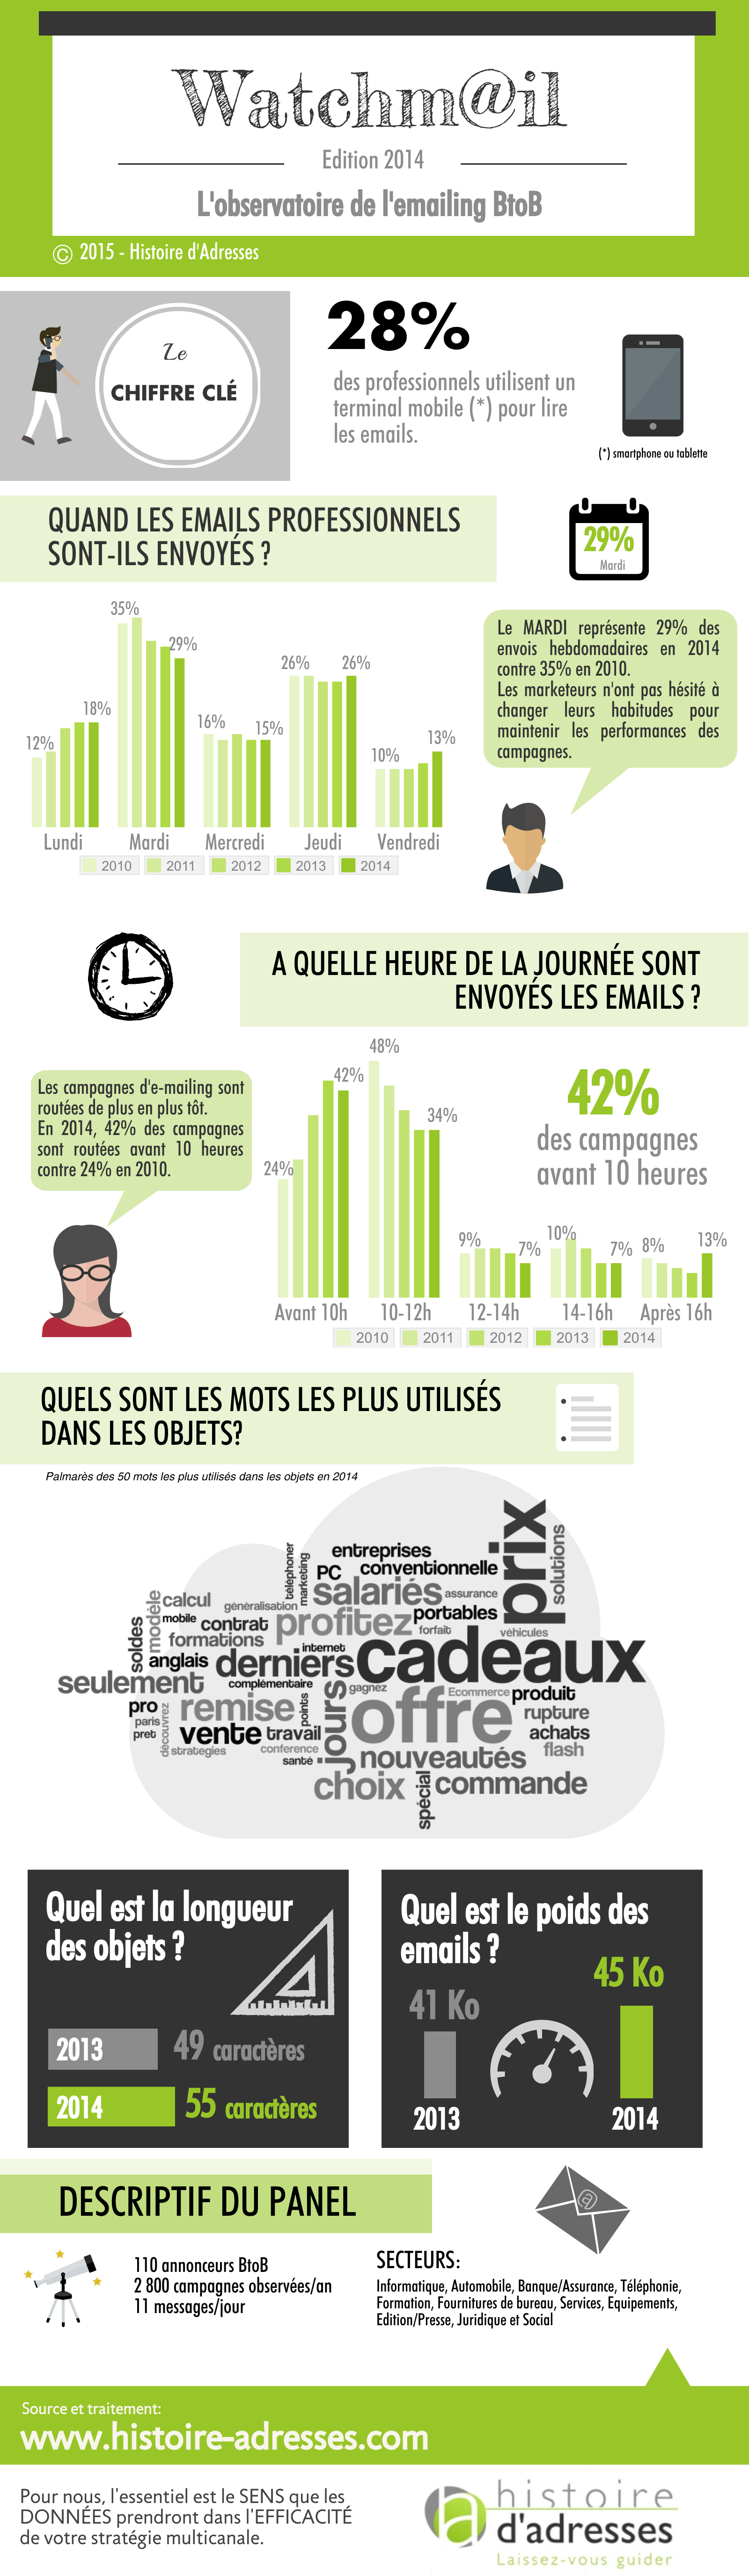 INFOGRAPHIE_HA_Watchmail_2014